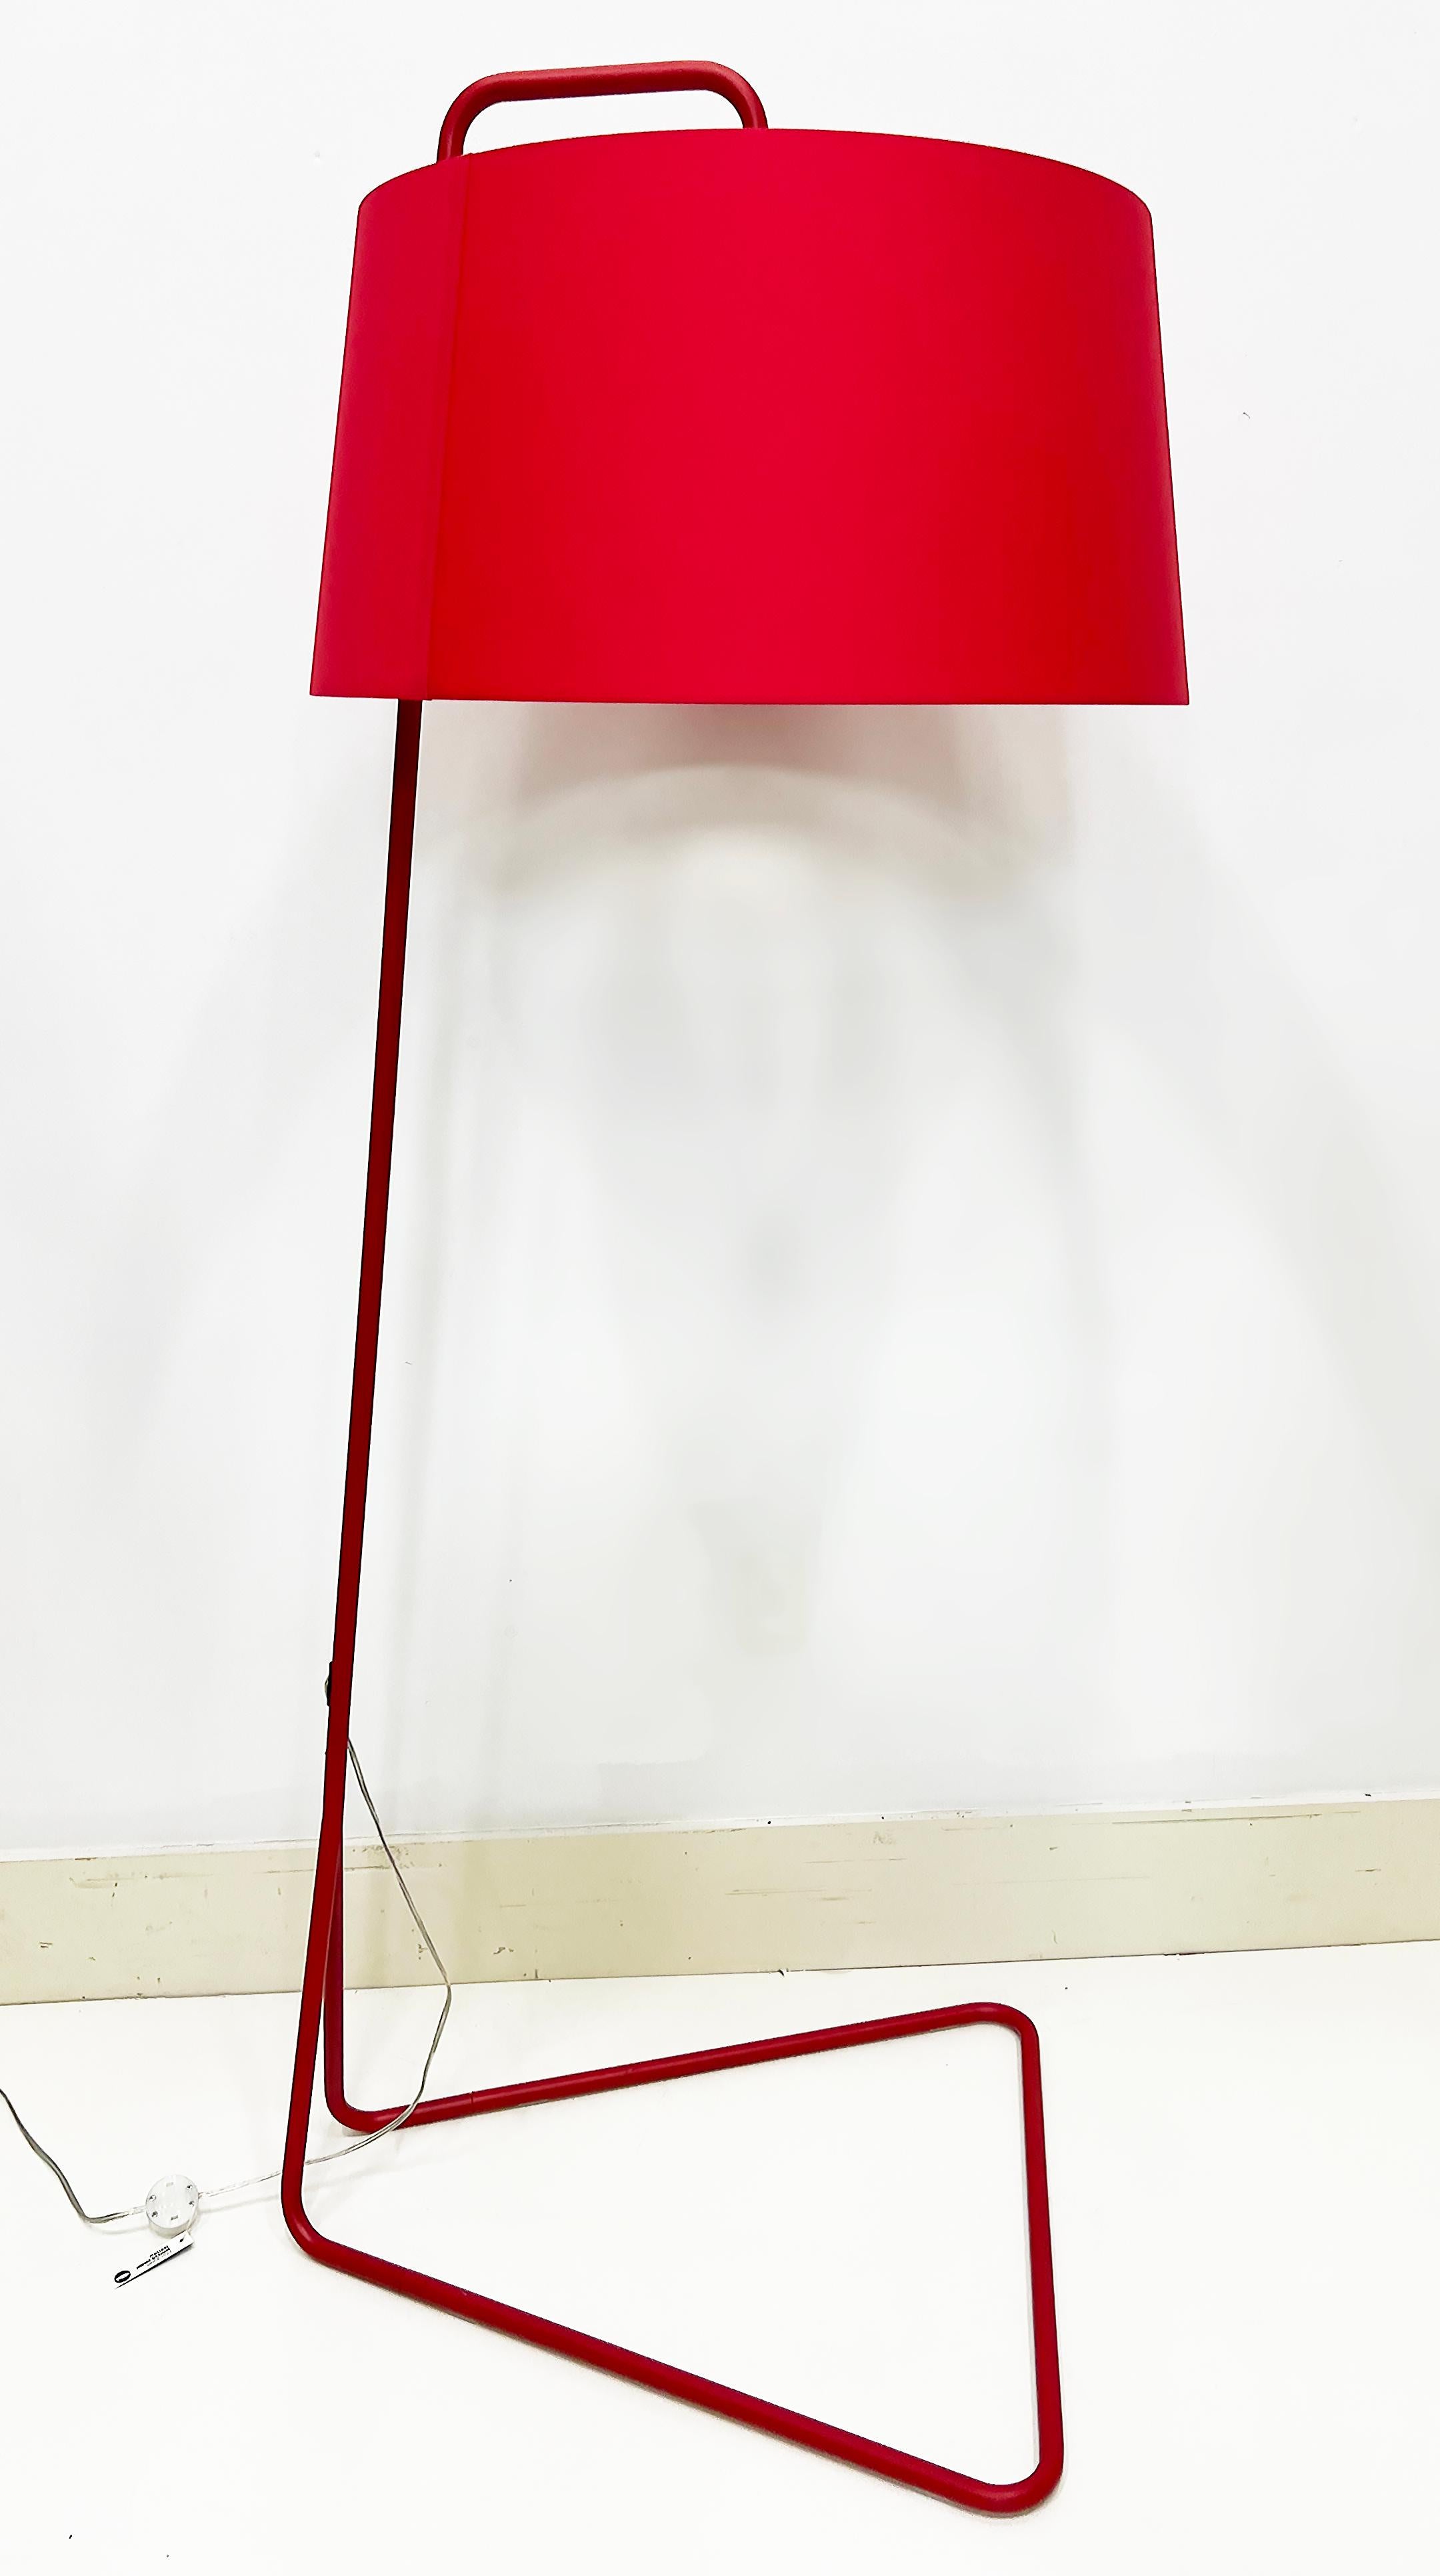 Like New Calligaris Sextans Floor Lamp in Red from Italy

Offered for sale is a Calligaris Sextans model floor lamp metal floor lamp finished in red with a large red drum shade.  The Sextans suspension lamp is equipped with a large fabric shade